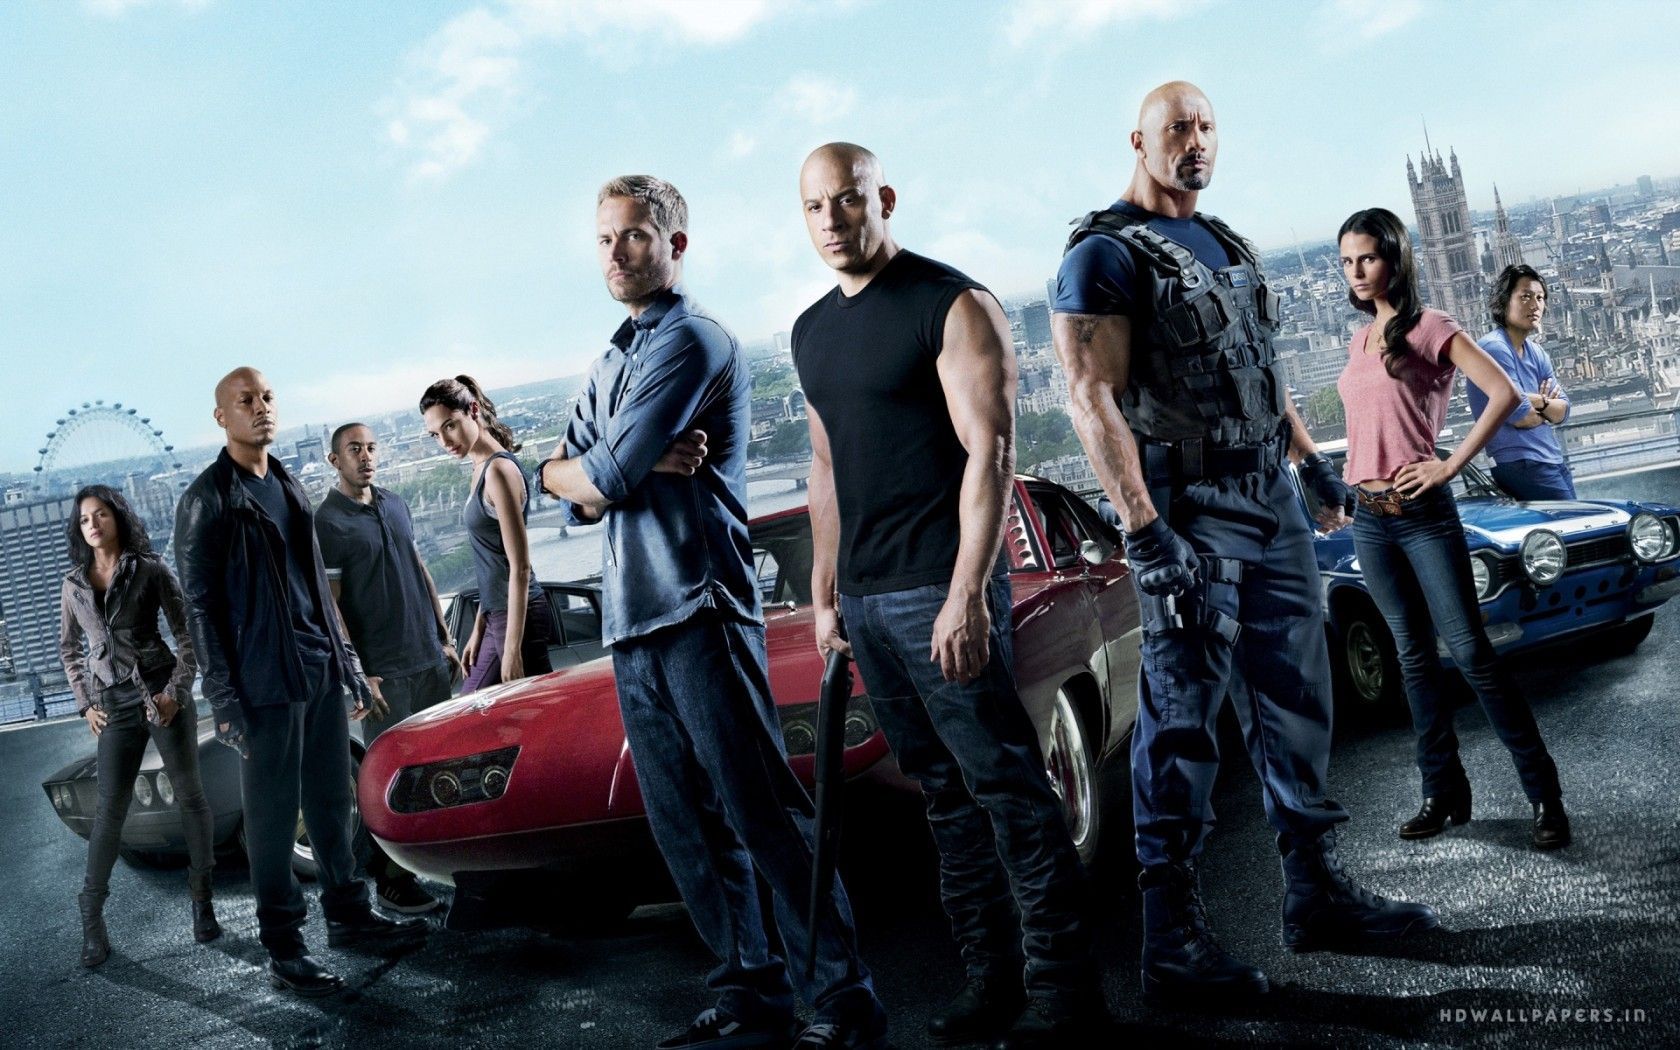 Fast and Furious 6 Wallpaper. Furious movie, New movies, Fast